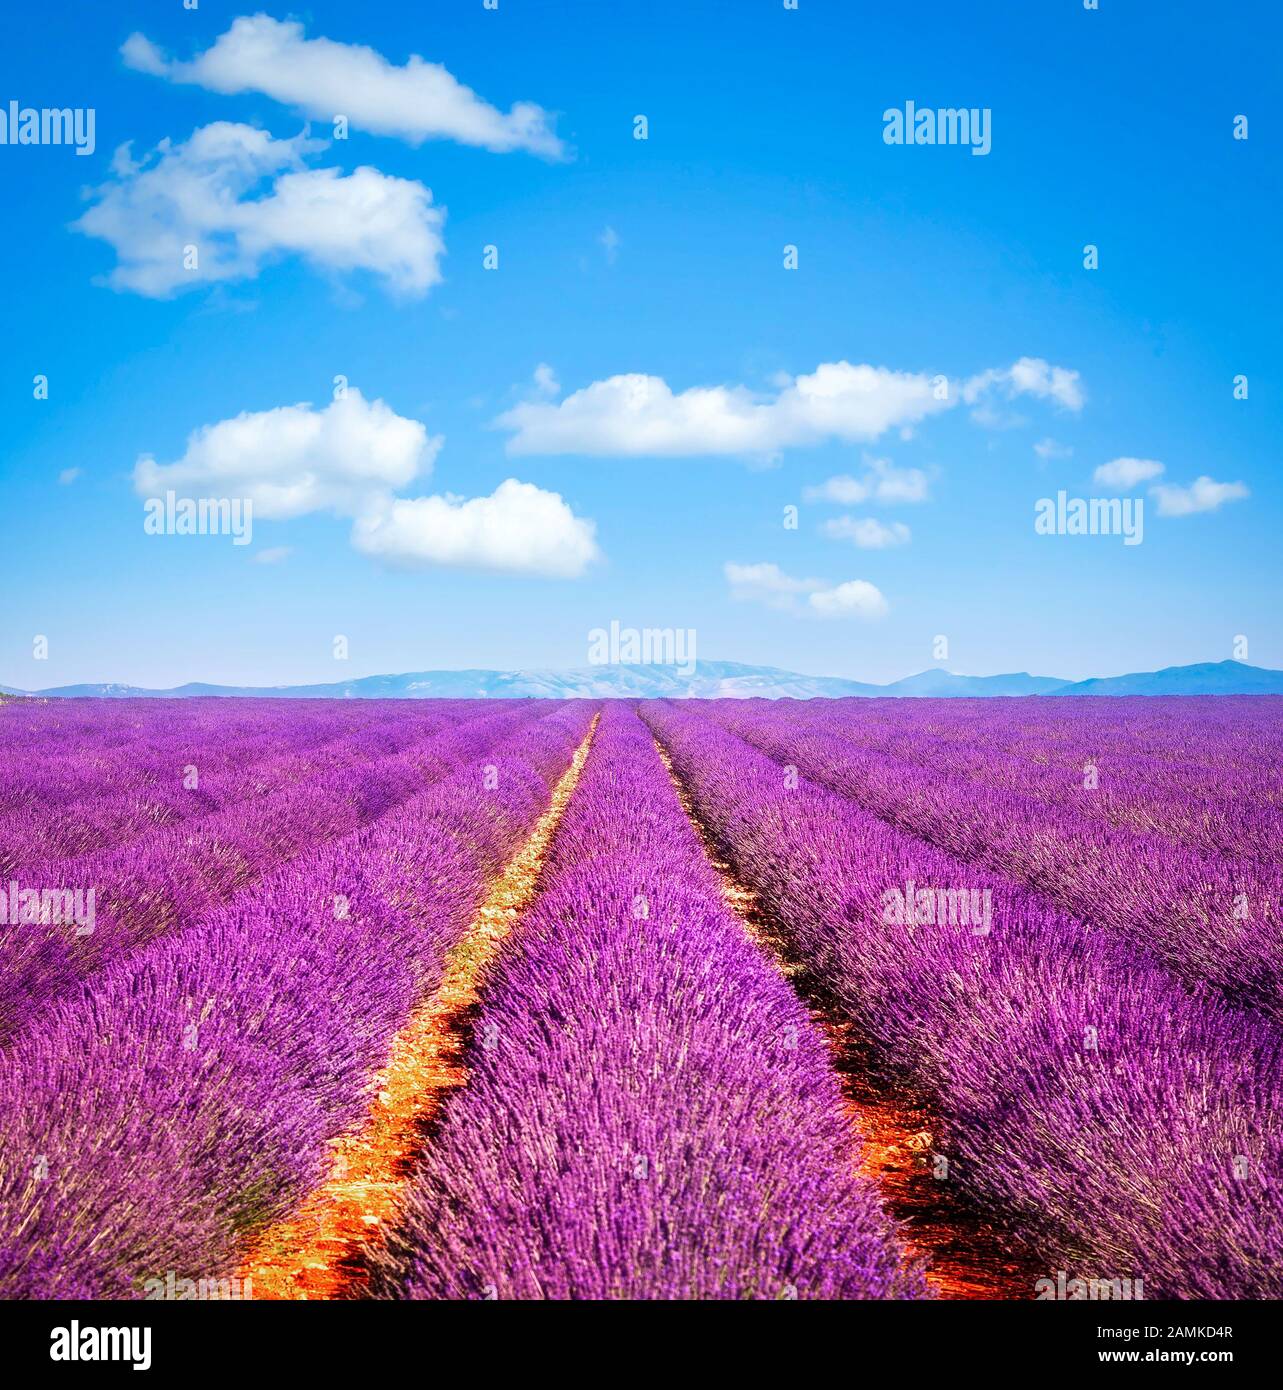 Lavender flower blooming scented fields in endless rows at sunset. Valensole plateau, Provence, France, europe. Stock Photo